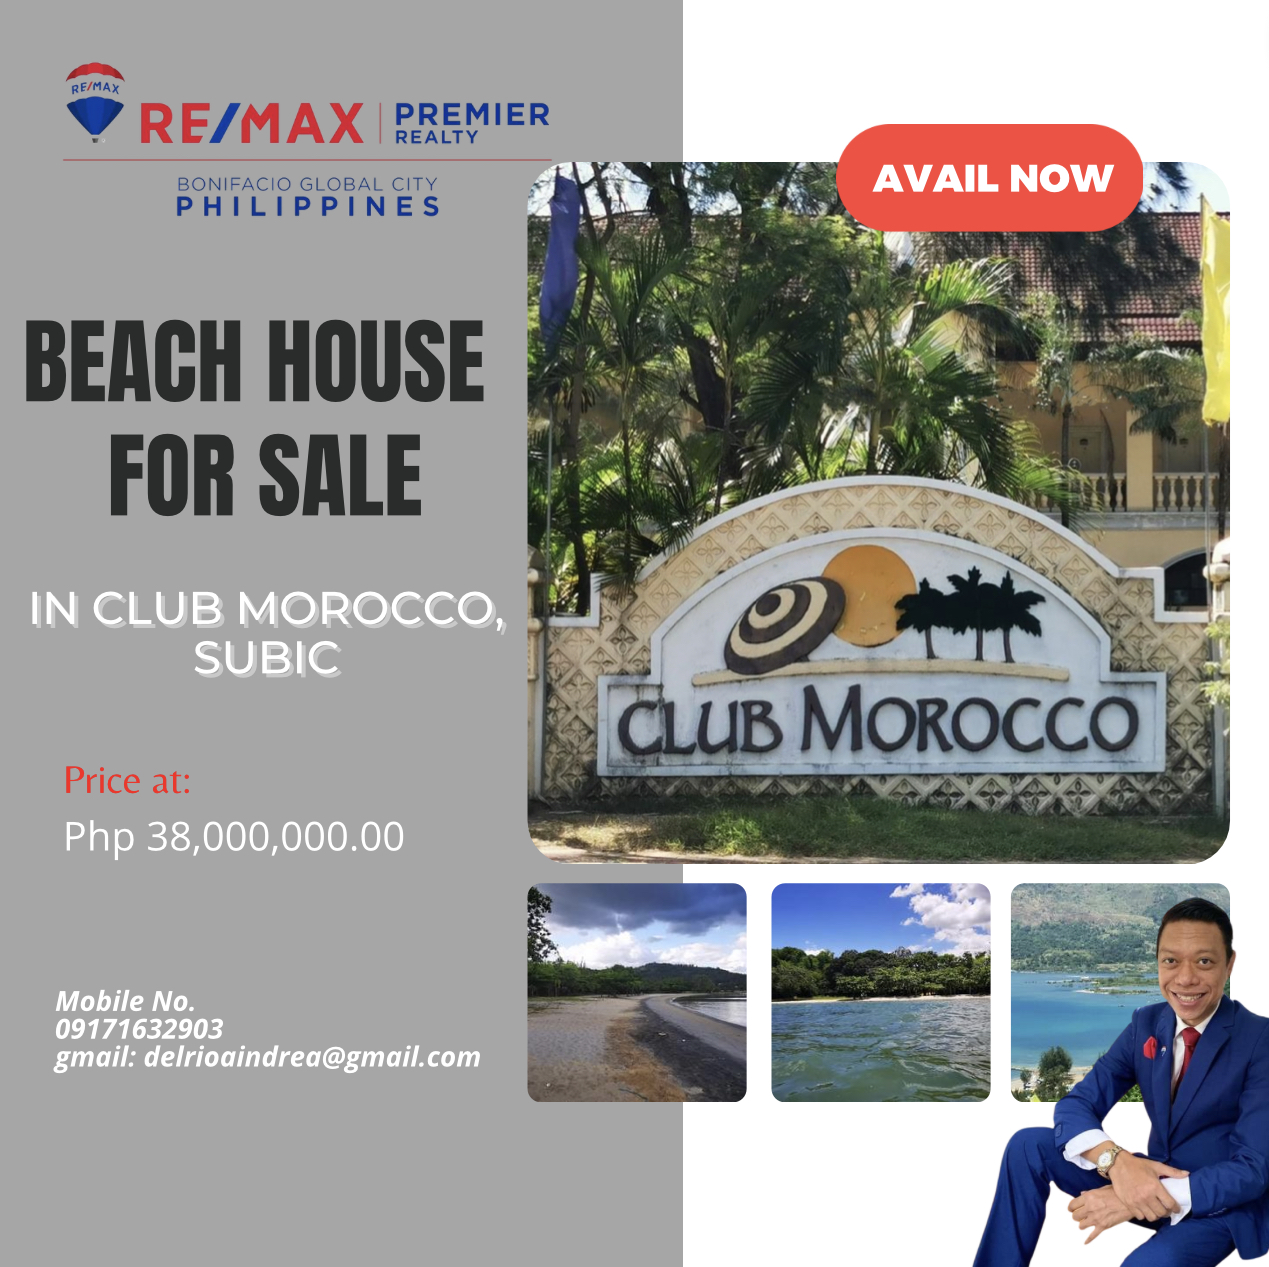 BEACH HOUSE FOR SALE in Club Morocco, Subic‼️